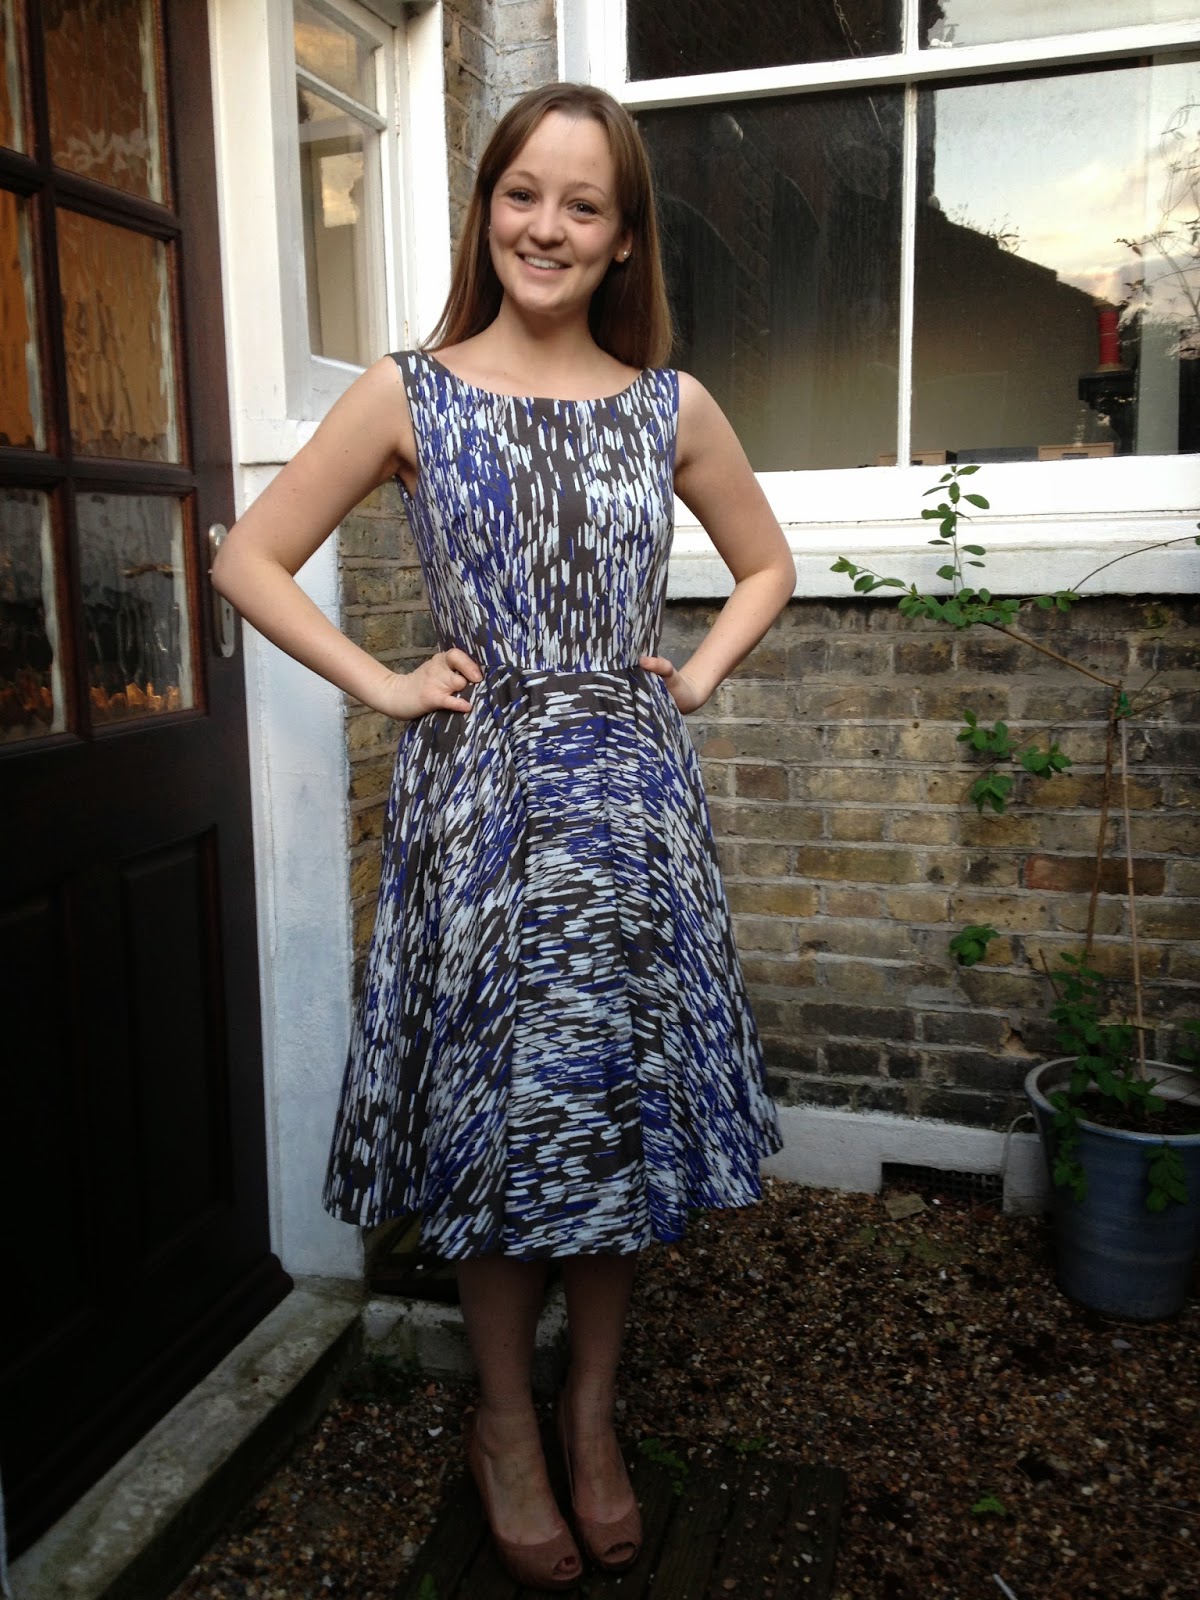 Diary of a Chainstitcher: Pattern Testing the Betty Dress Sewing Pattern from Sew Over It